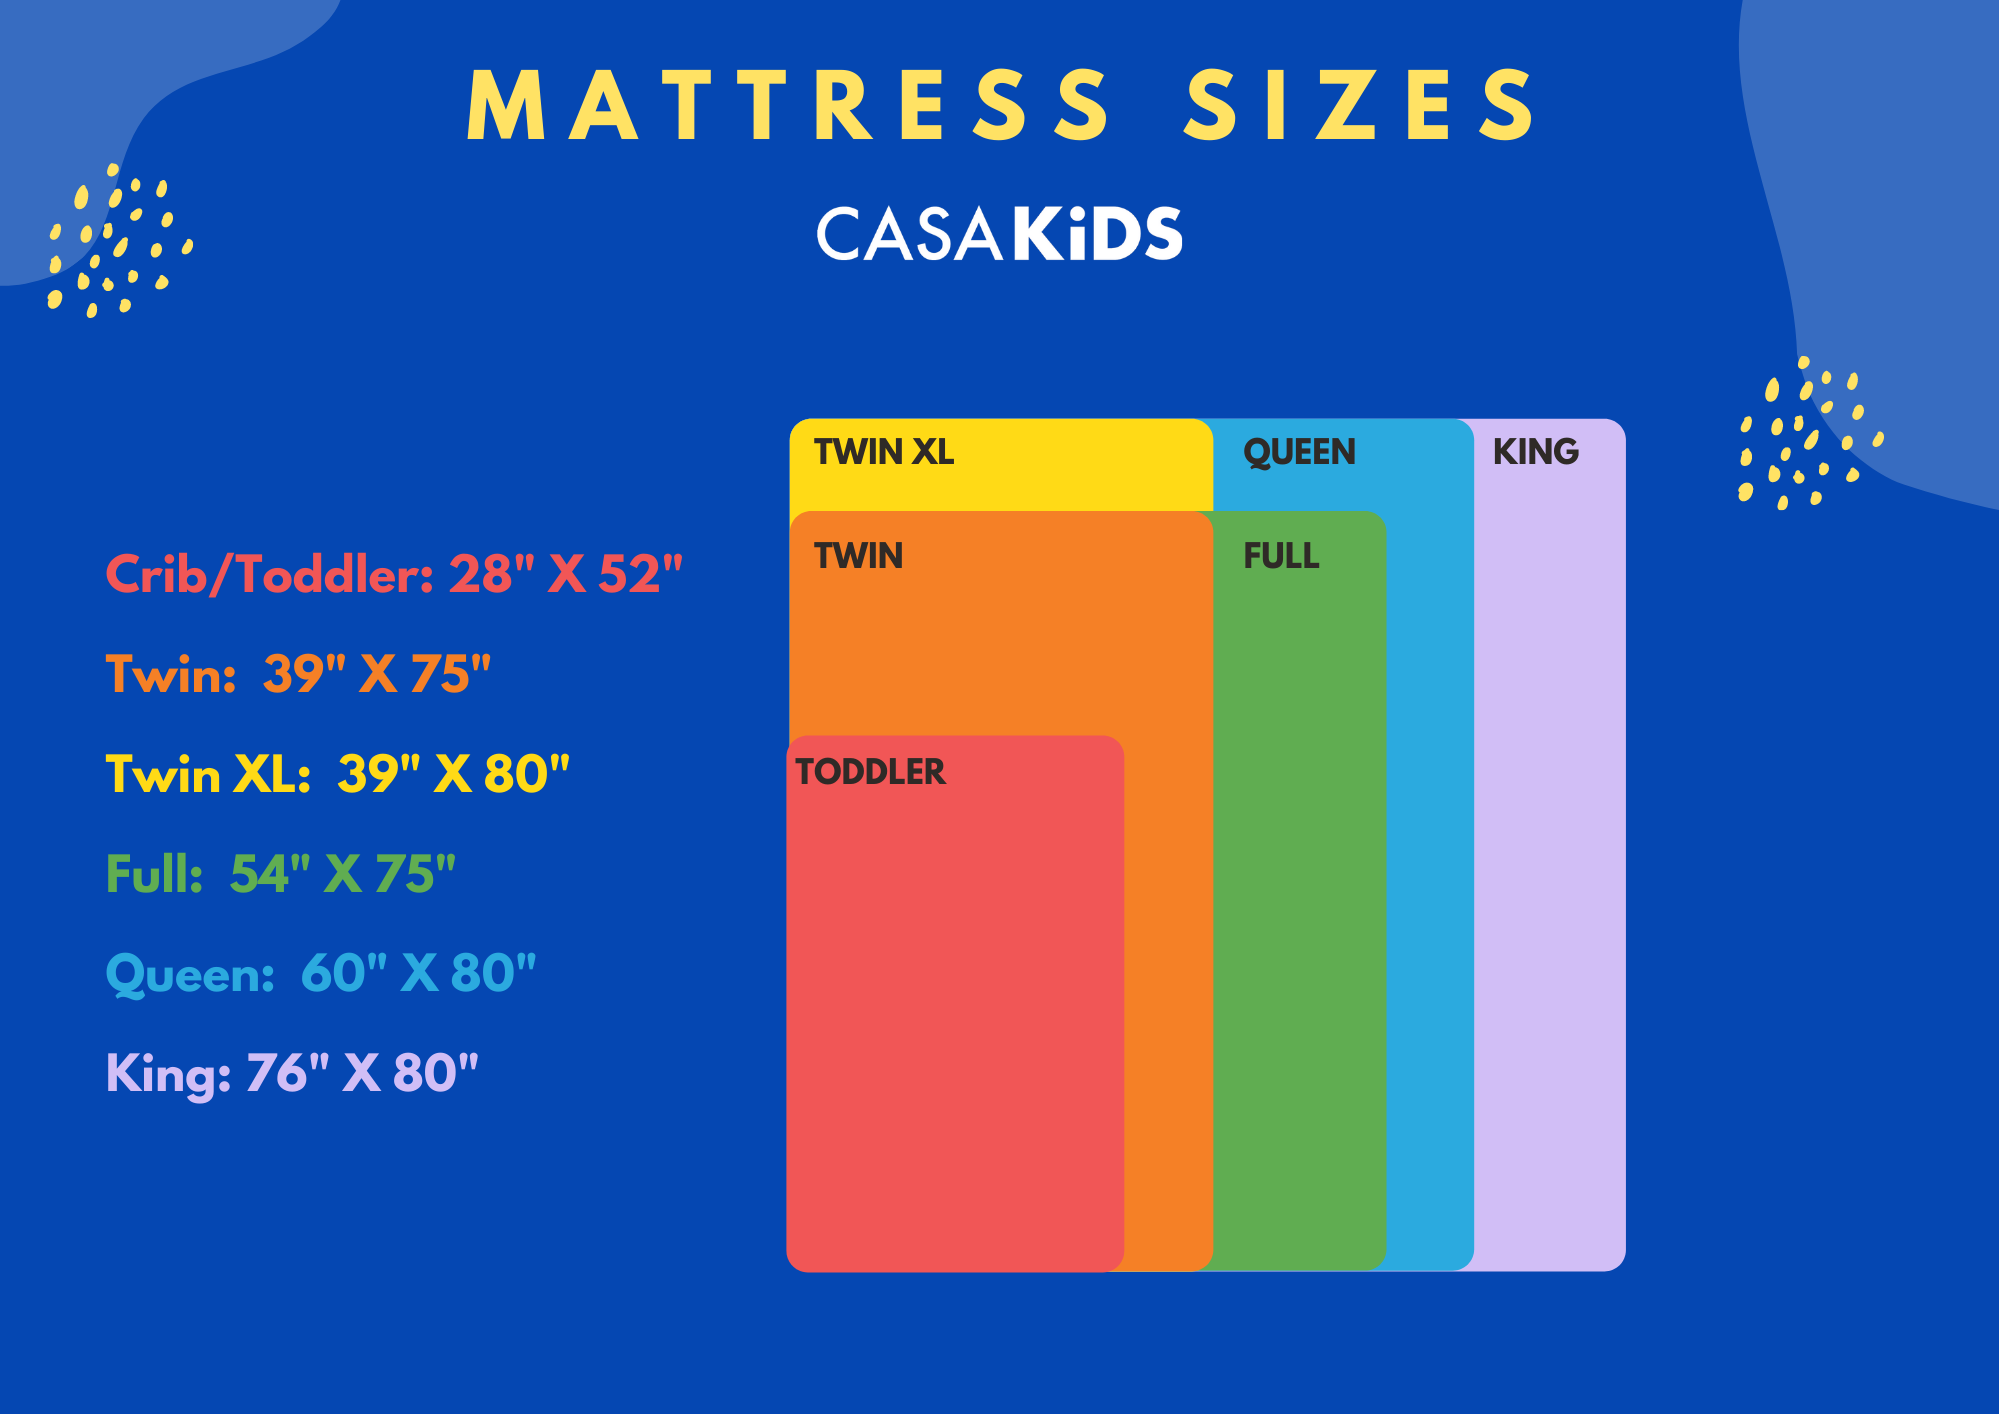 Comparison chart of mattress sizes from crib to king with dimensions.